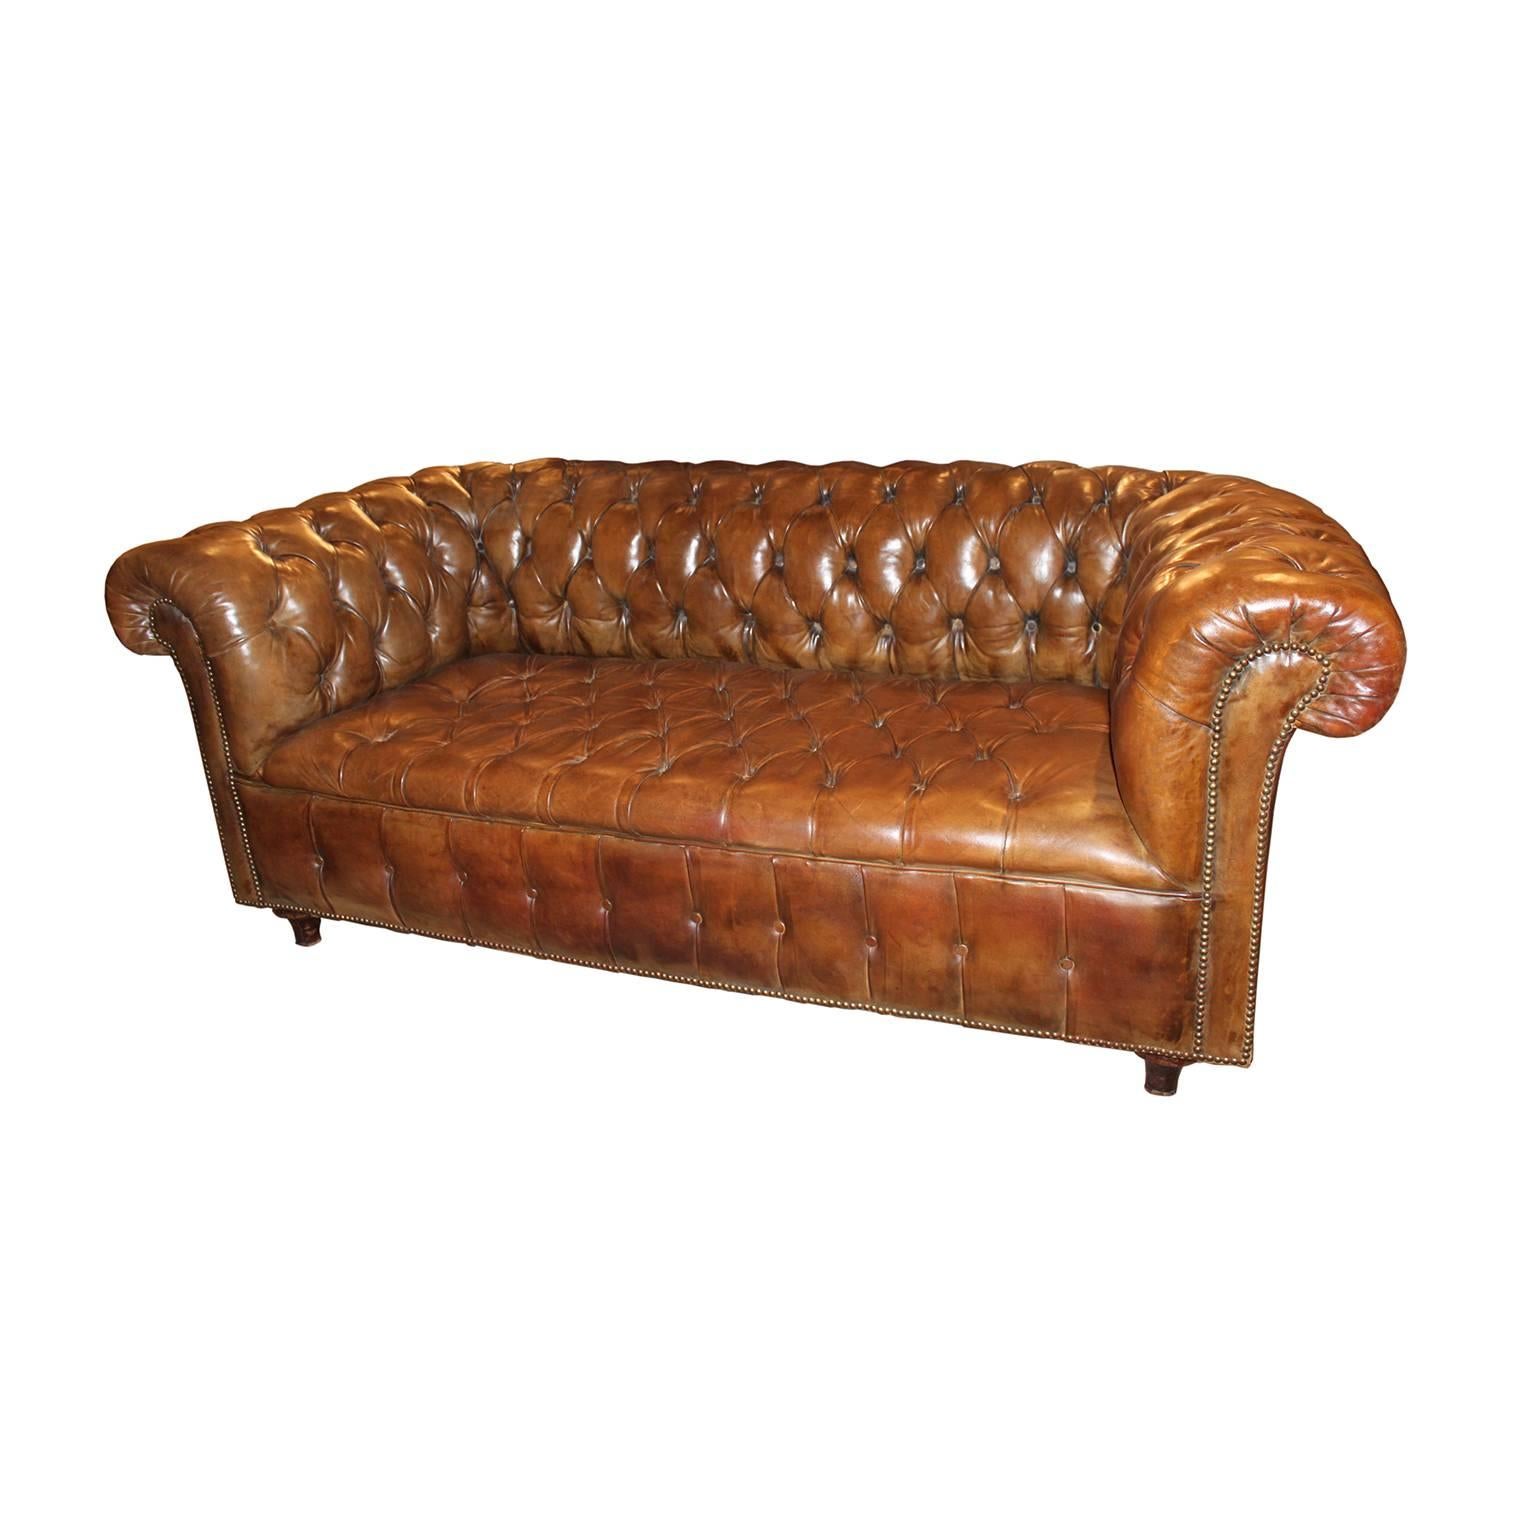 Chesterfield light brown leather tufted wingback sofa with all-over nail head trim.